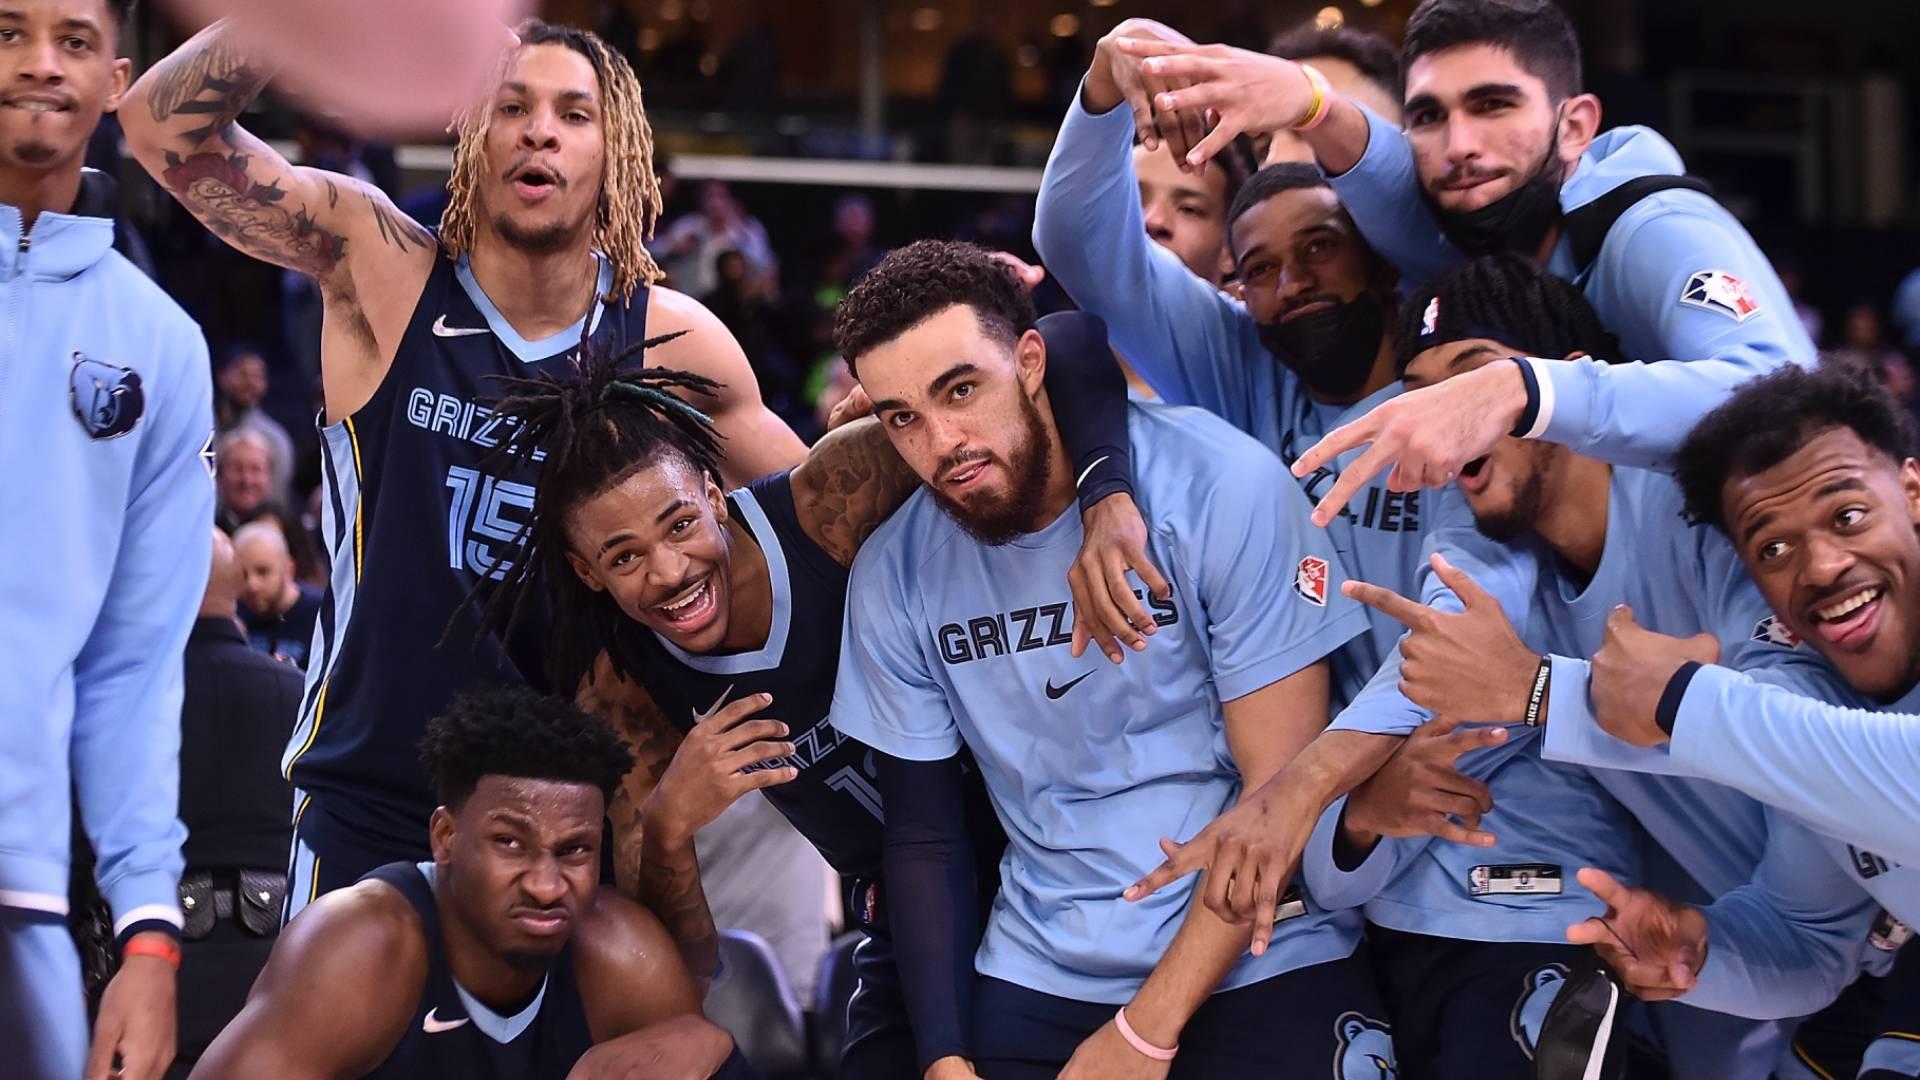 The Grizzlies have arrived as the Western Conference's sleeping giant